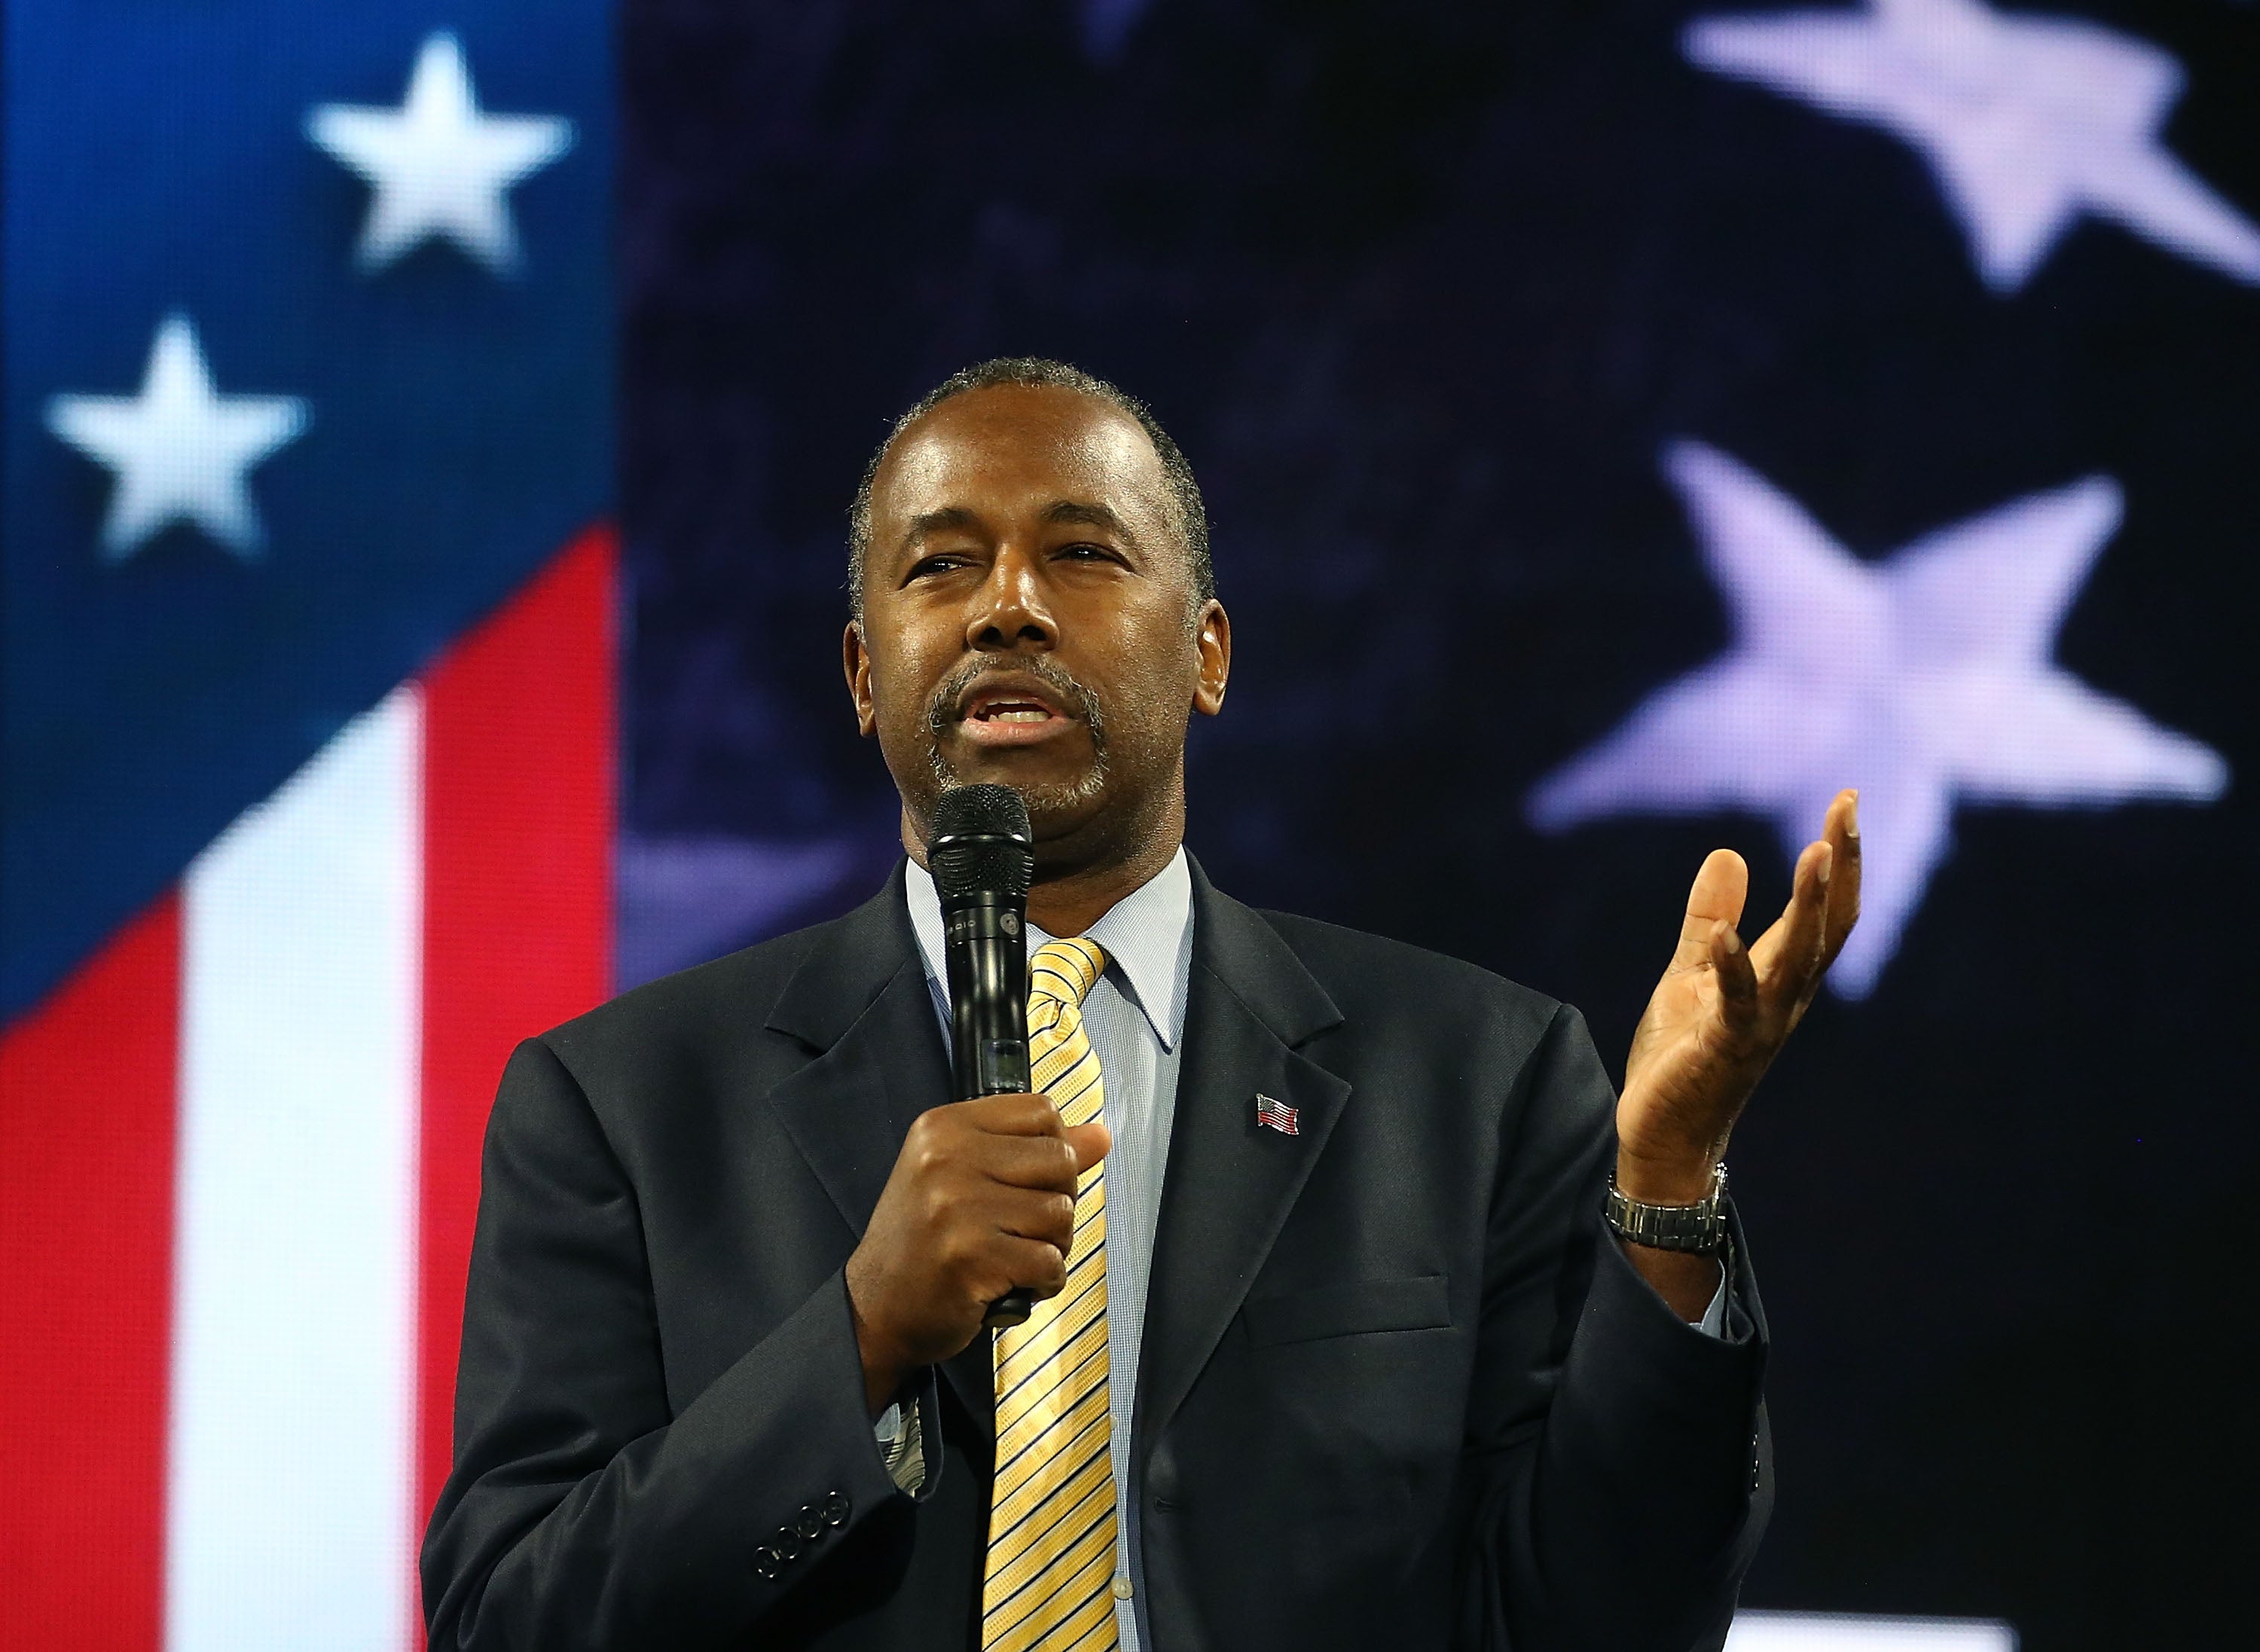 The Quick Read: Ben Carson's HUD Spends Thousands On Dining Set After Sharing Plans To Cut Programs
